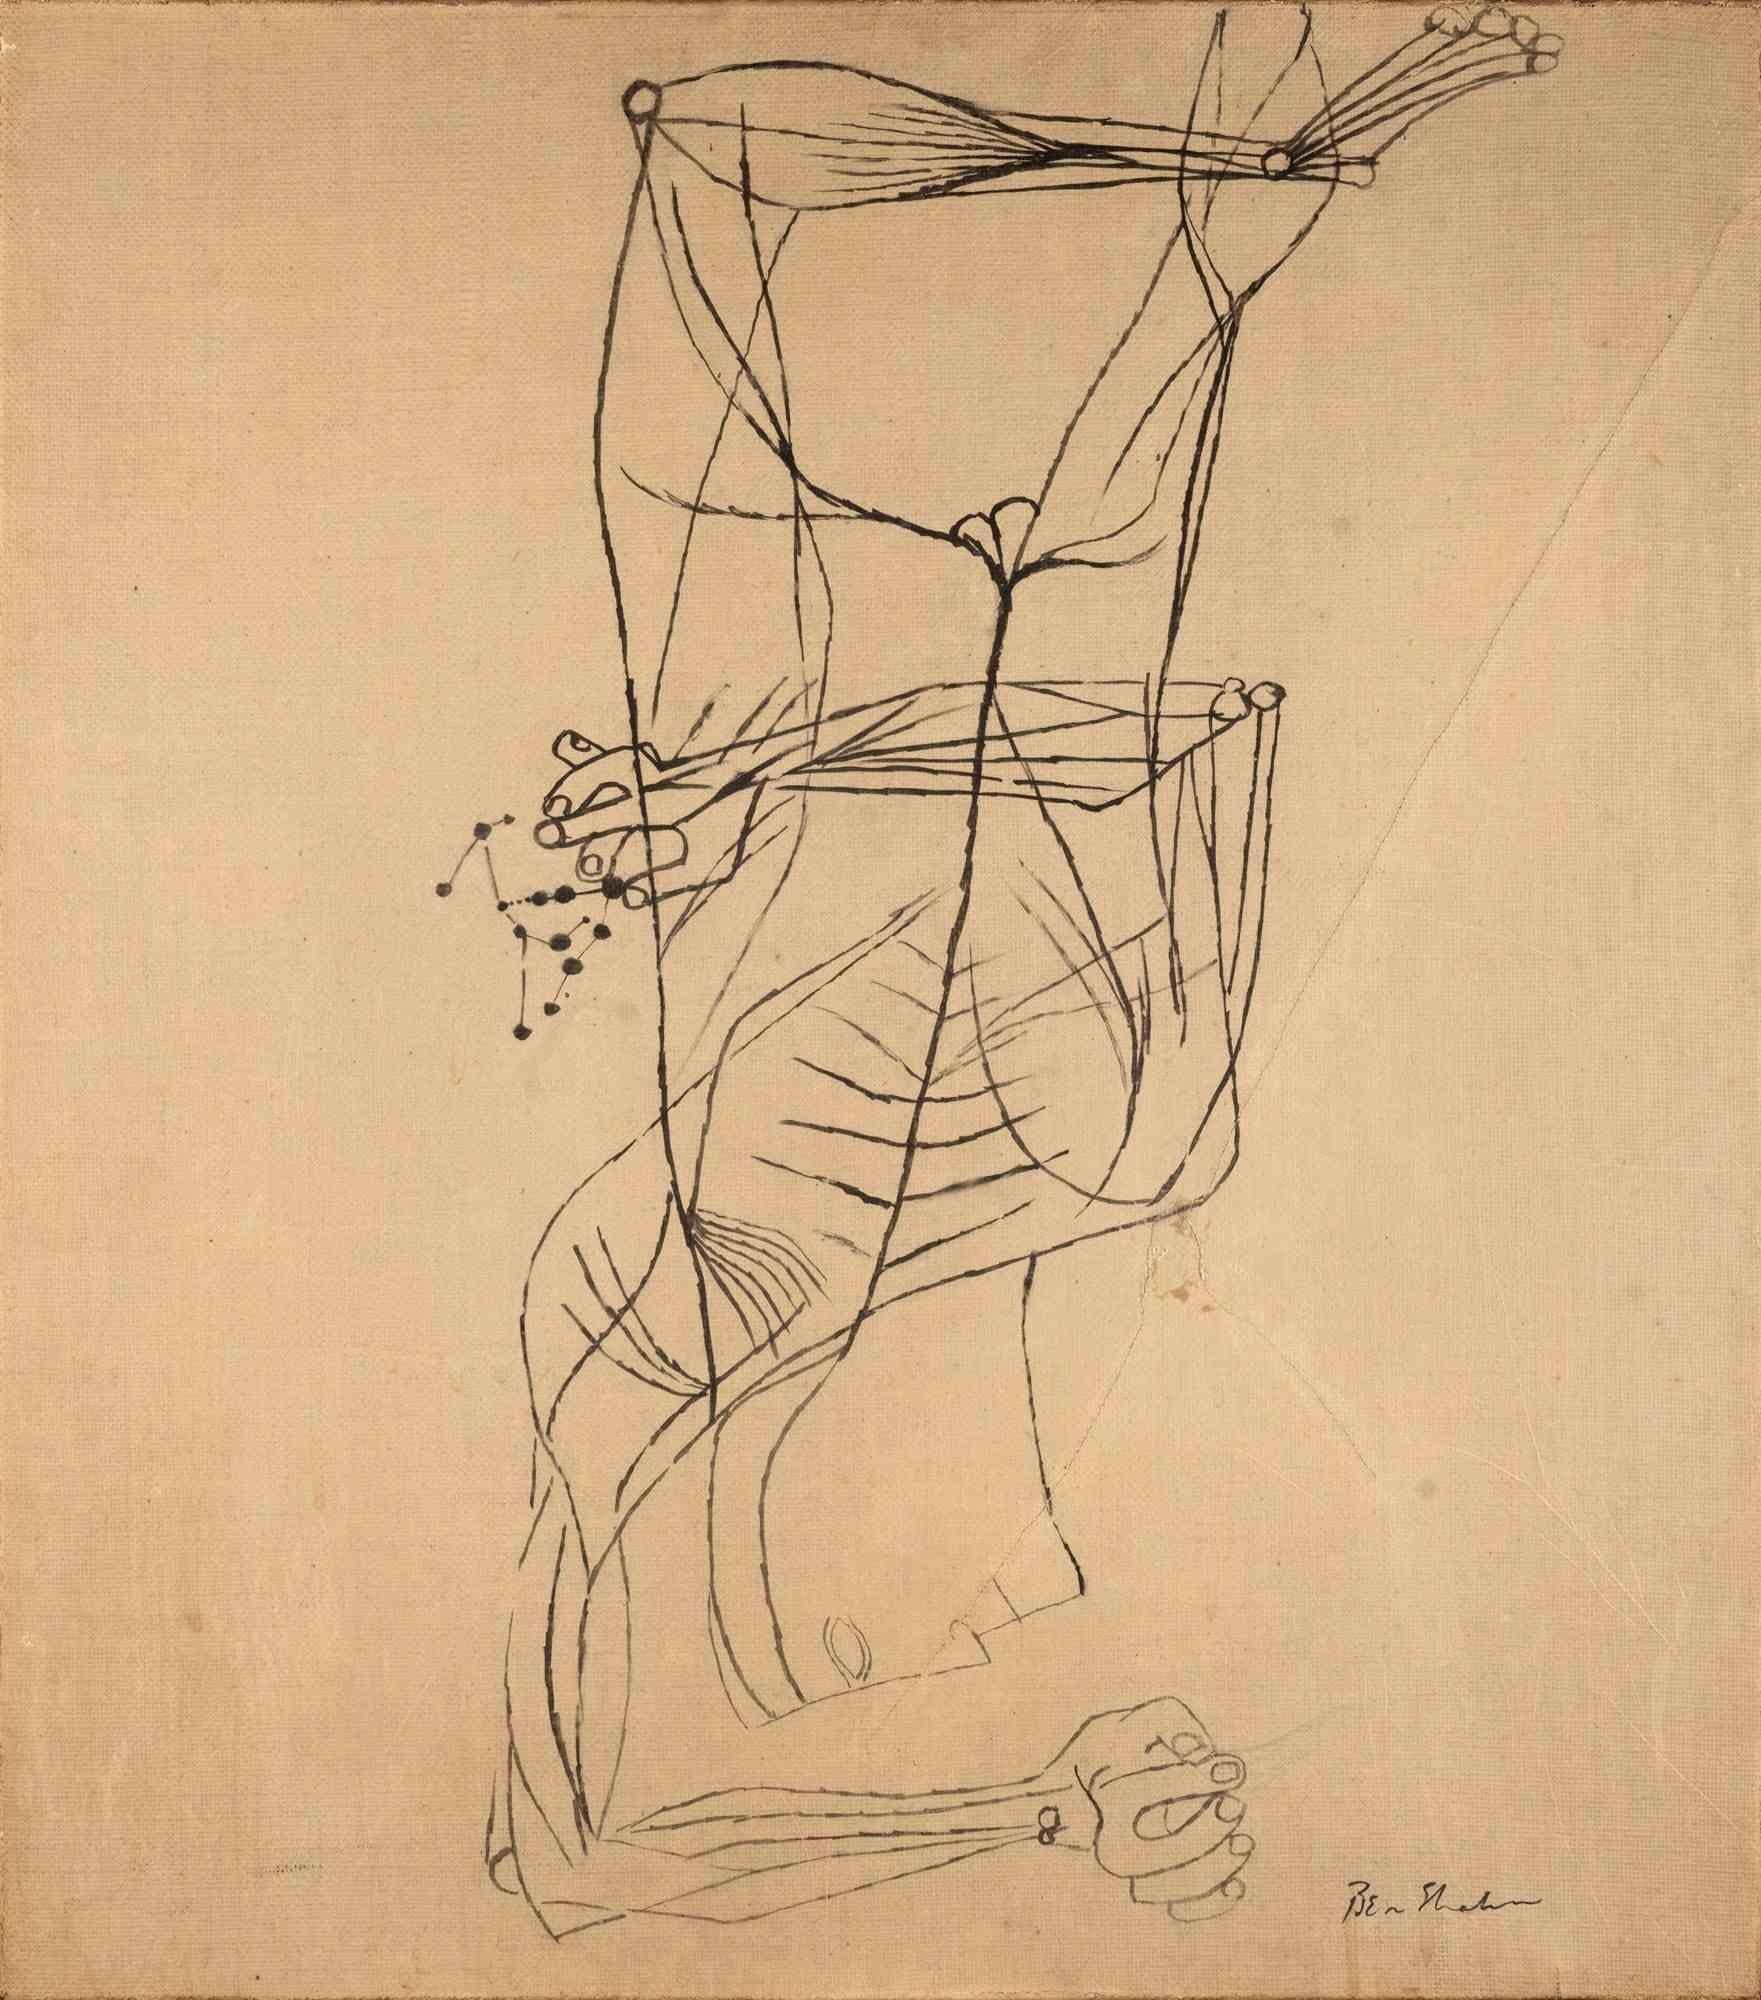 Untitled is an drawing realized by Ben Shahn (Kovno 1898-New York 1969) 

Pen drawing on paper applied on canvas.
Hand-signed lower right: Ben Shahn.
Some light folds and discoloring.
Prov: Rome, Giovanni Carandente collection, private collection.


